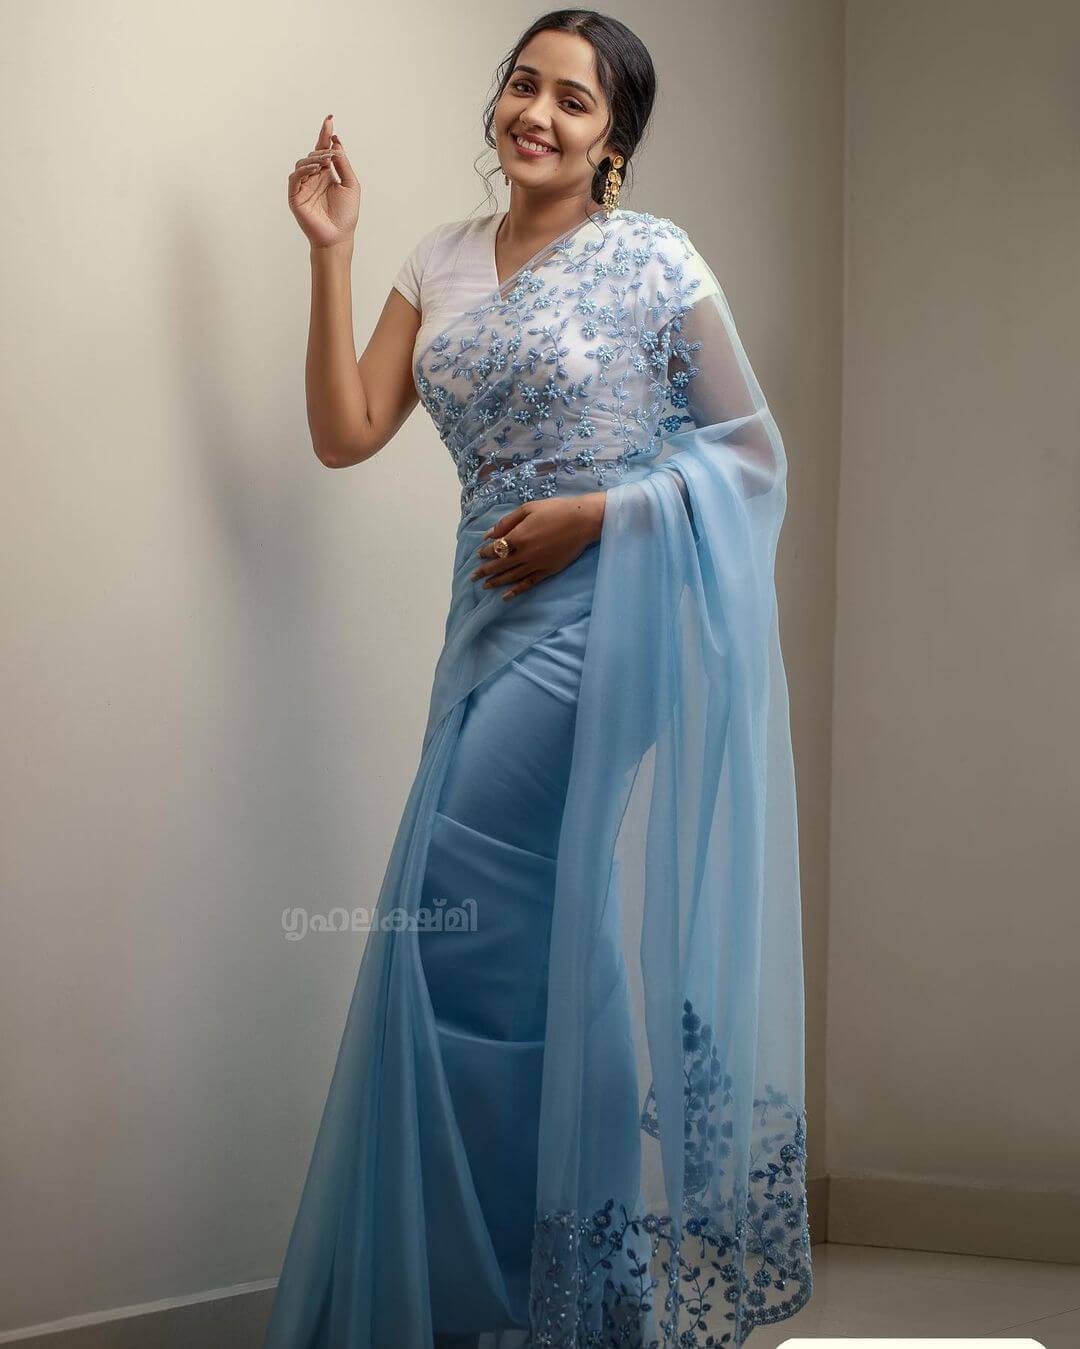 Naadodigal Fame Ayilya Nair In Baby Blue Net Embroidered Saree Paired With White Half Sleeves Blouse